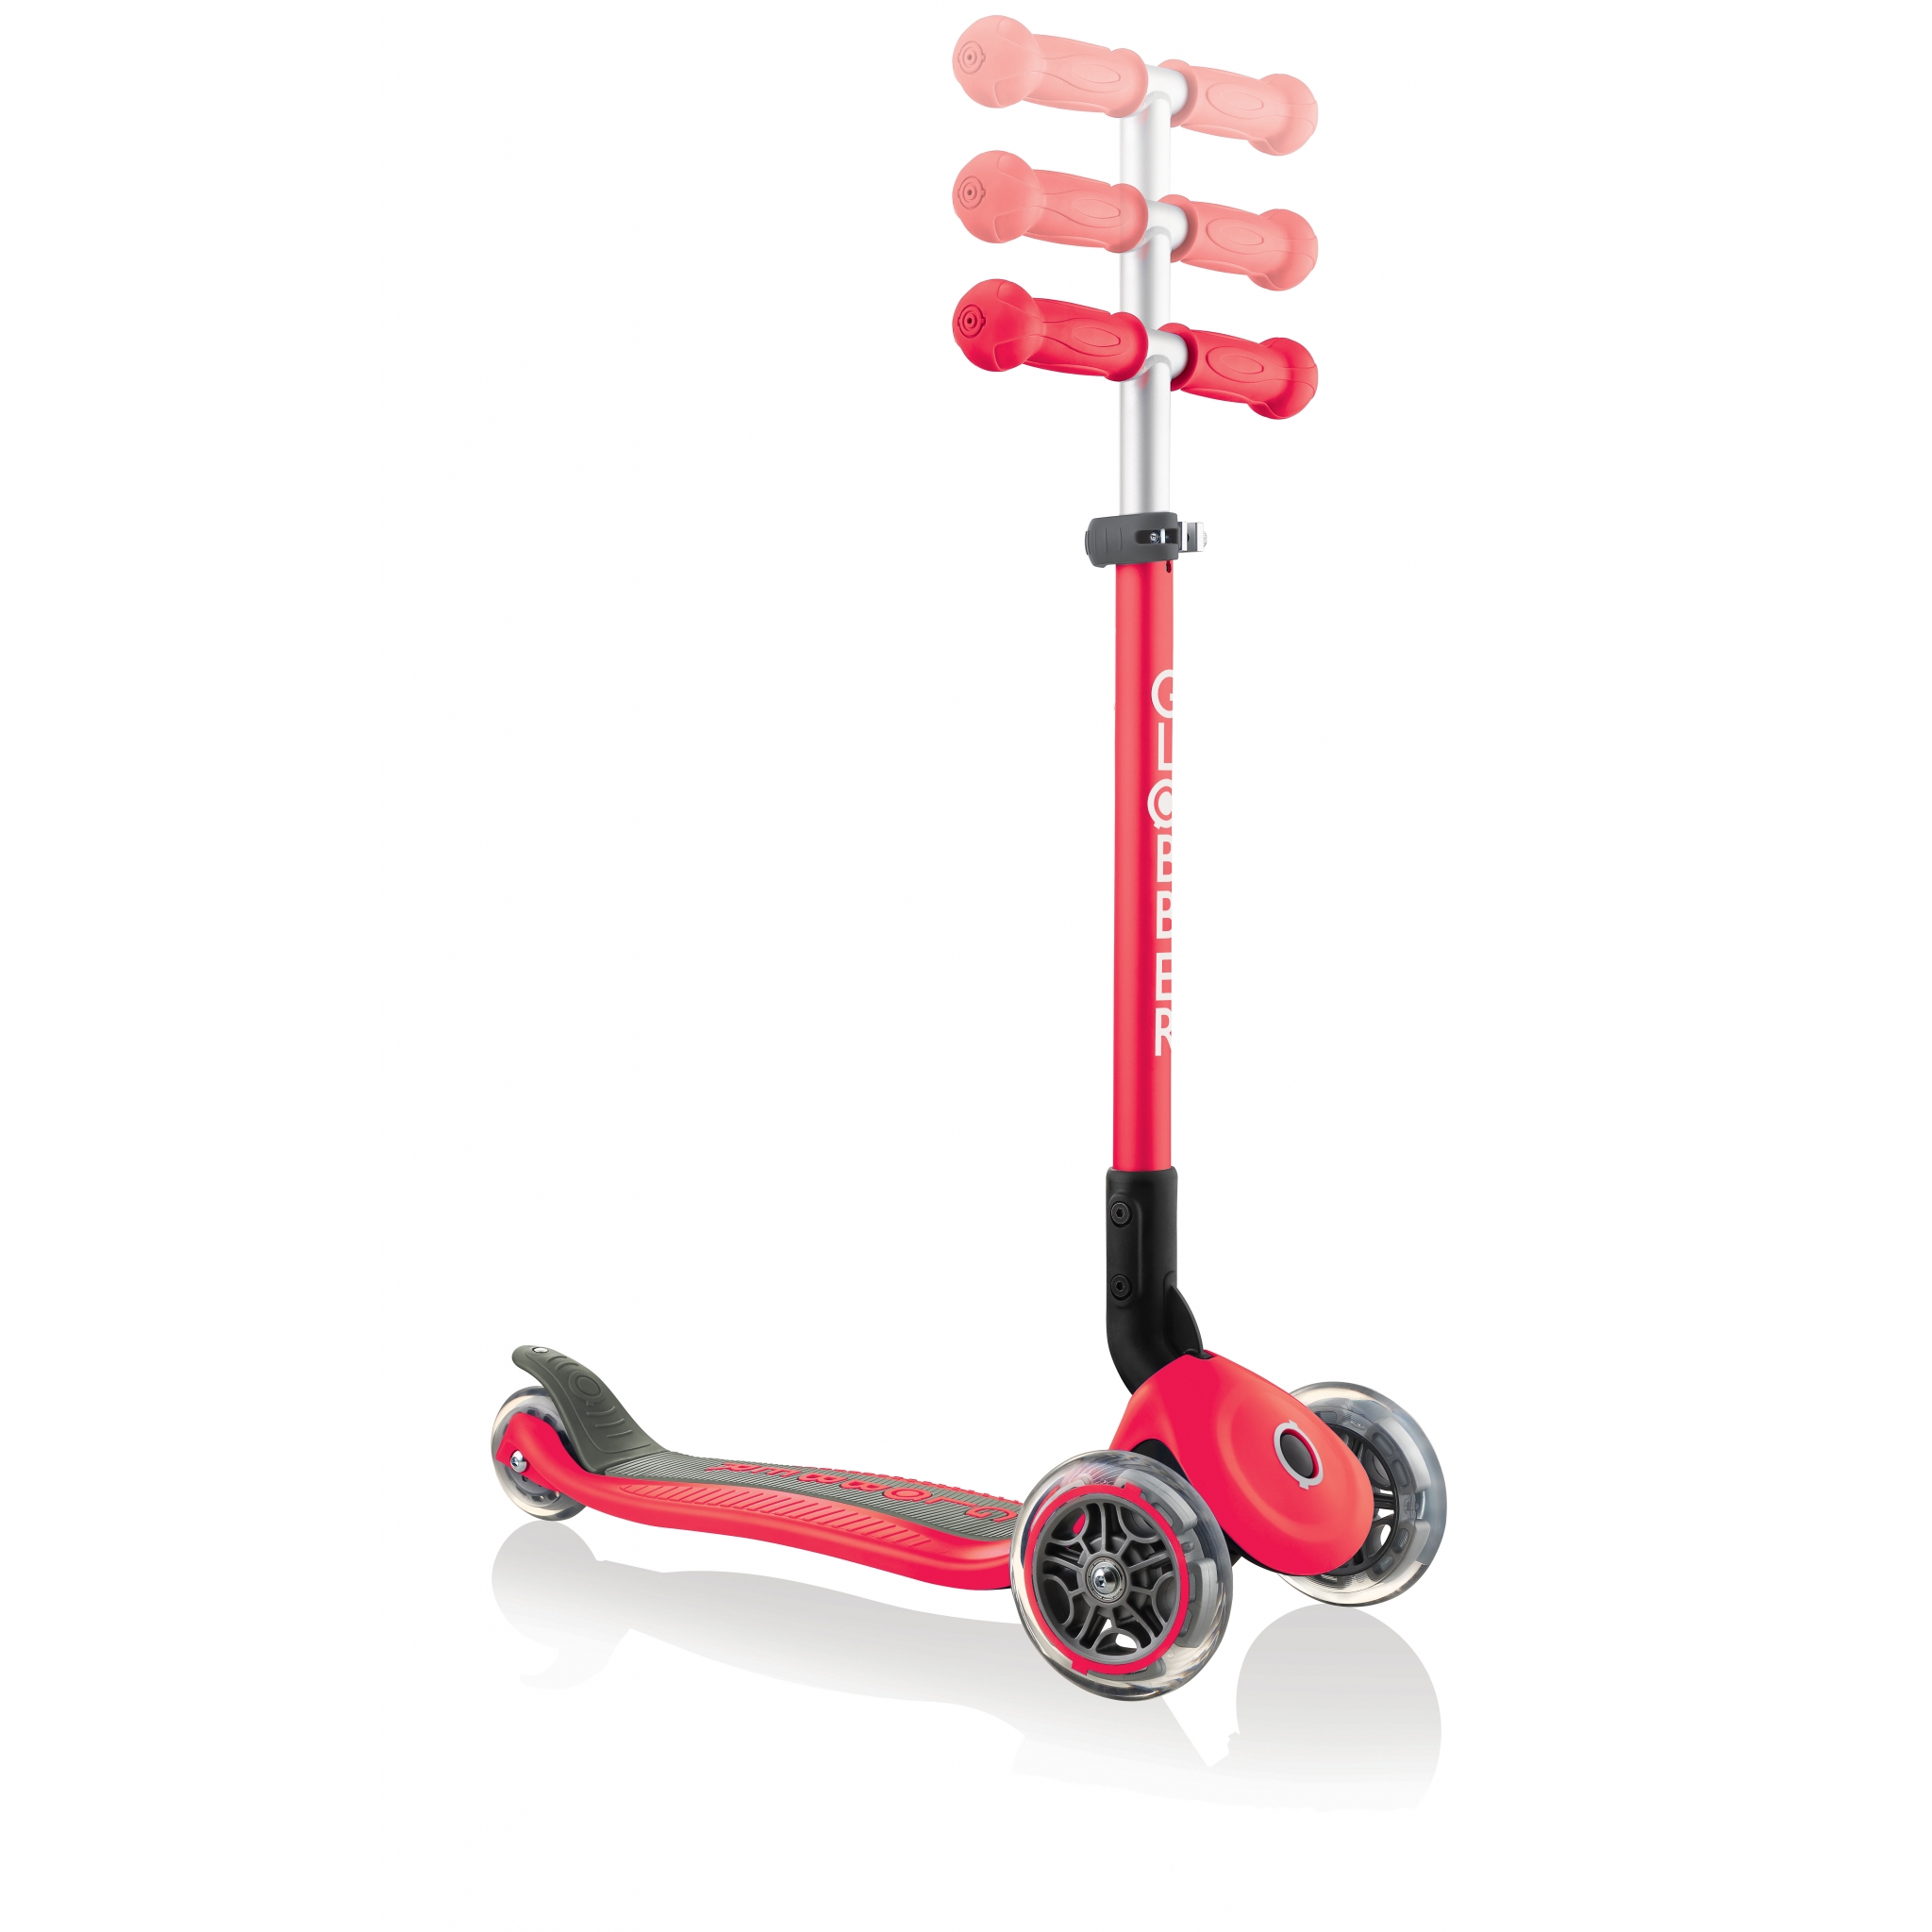 PRIMO-FOLDABLE-adjustable-scooter-for-kids-new-red 3